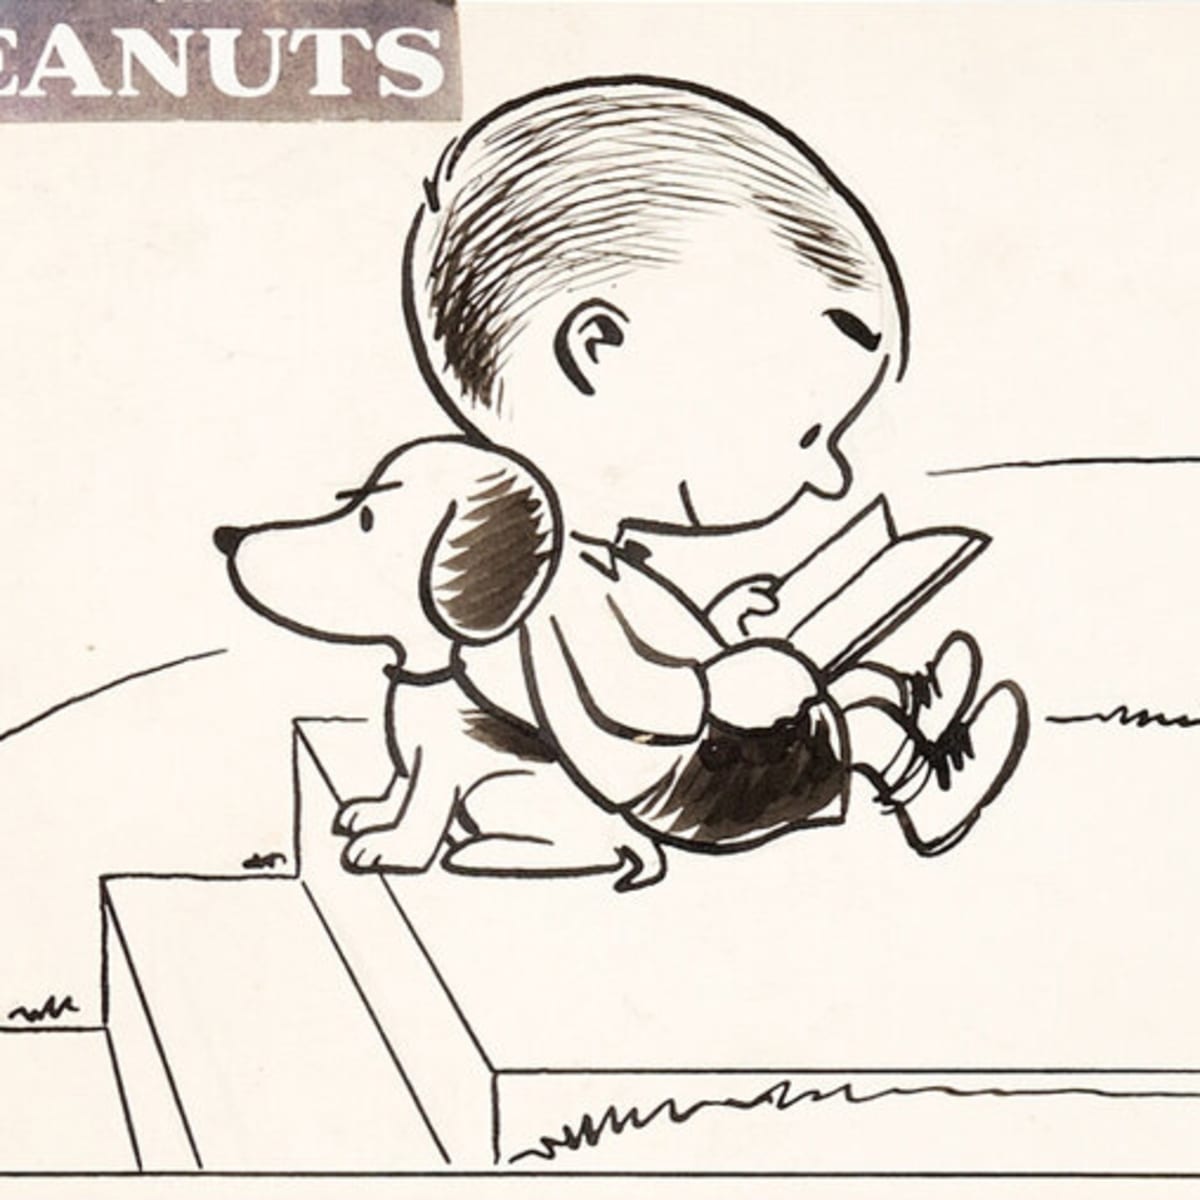 Early Snoopy comic strip fetches $192